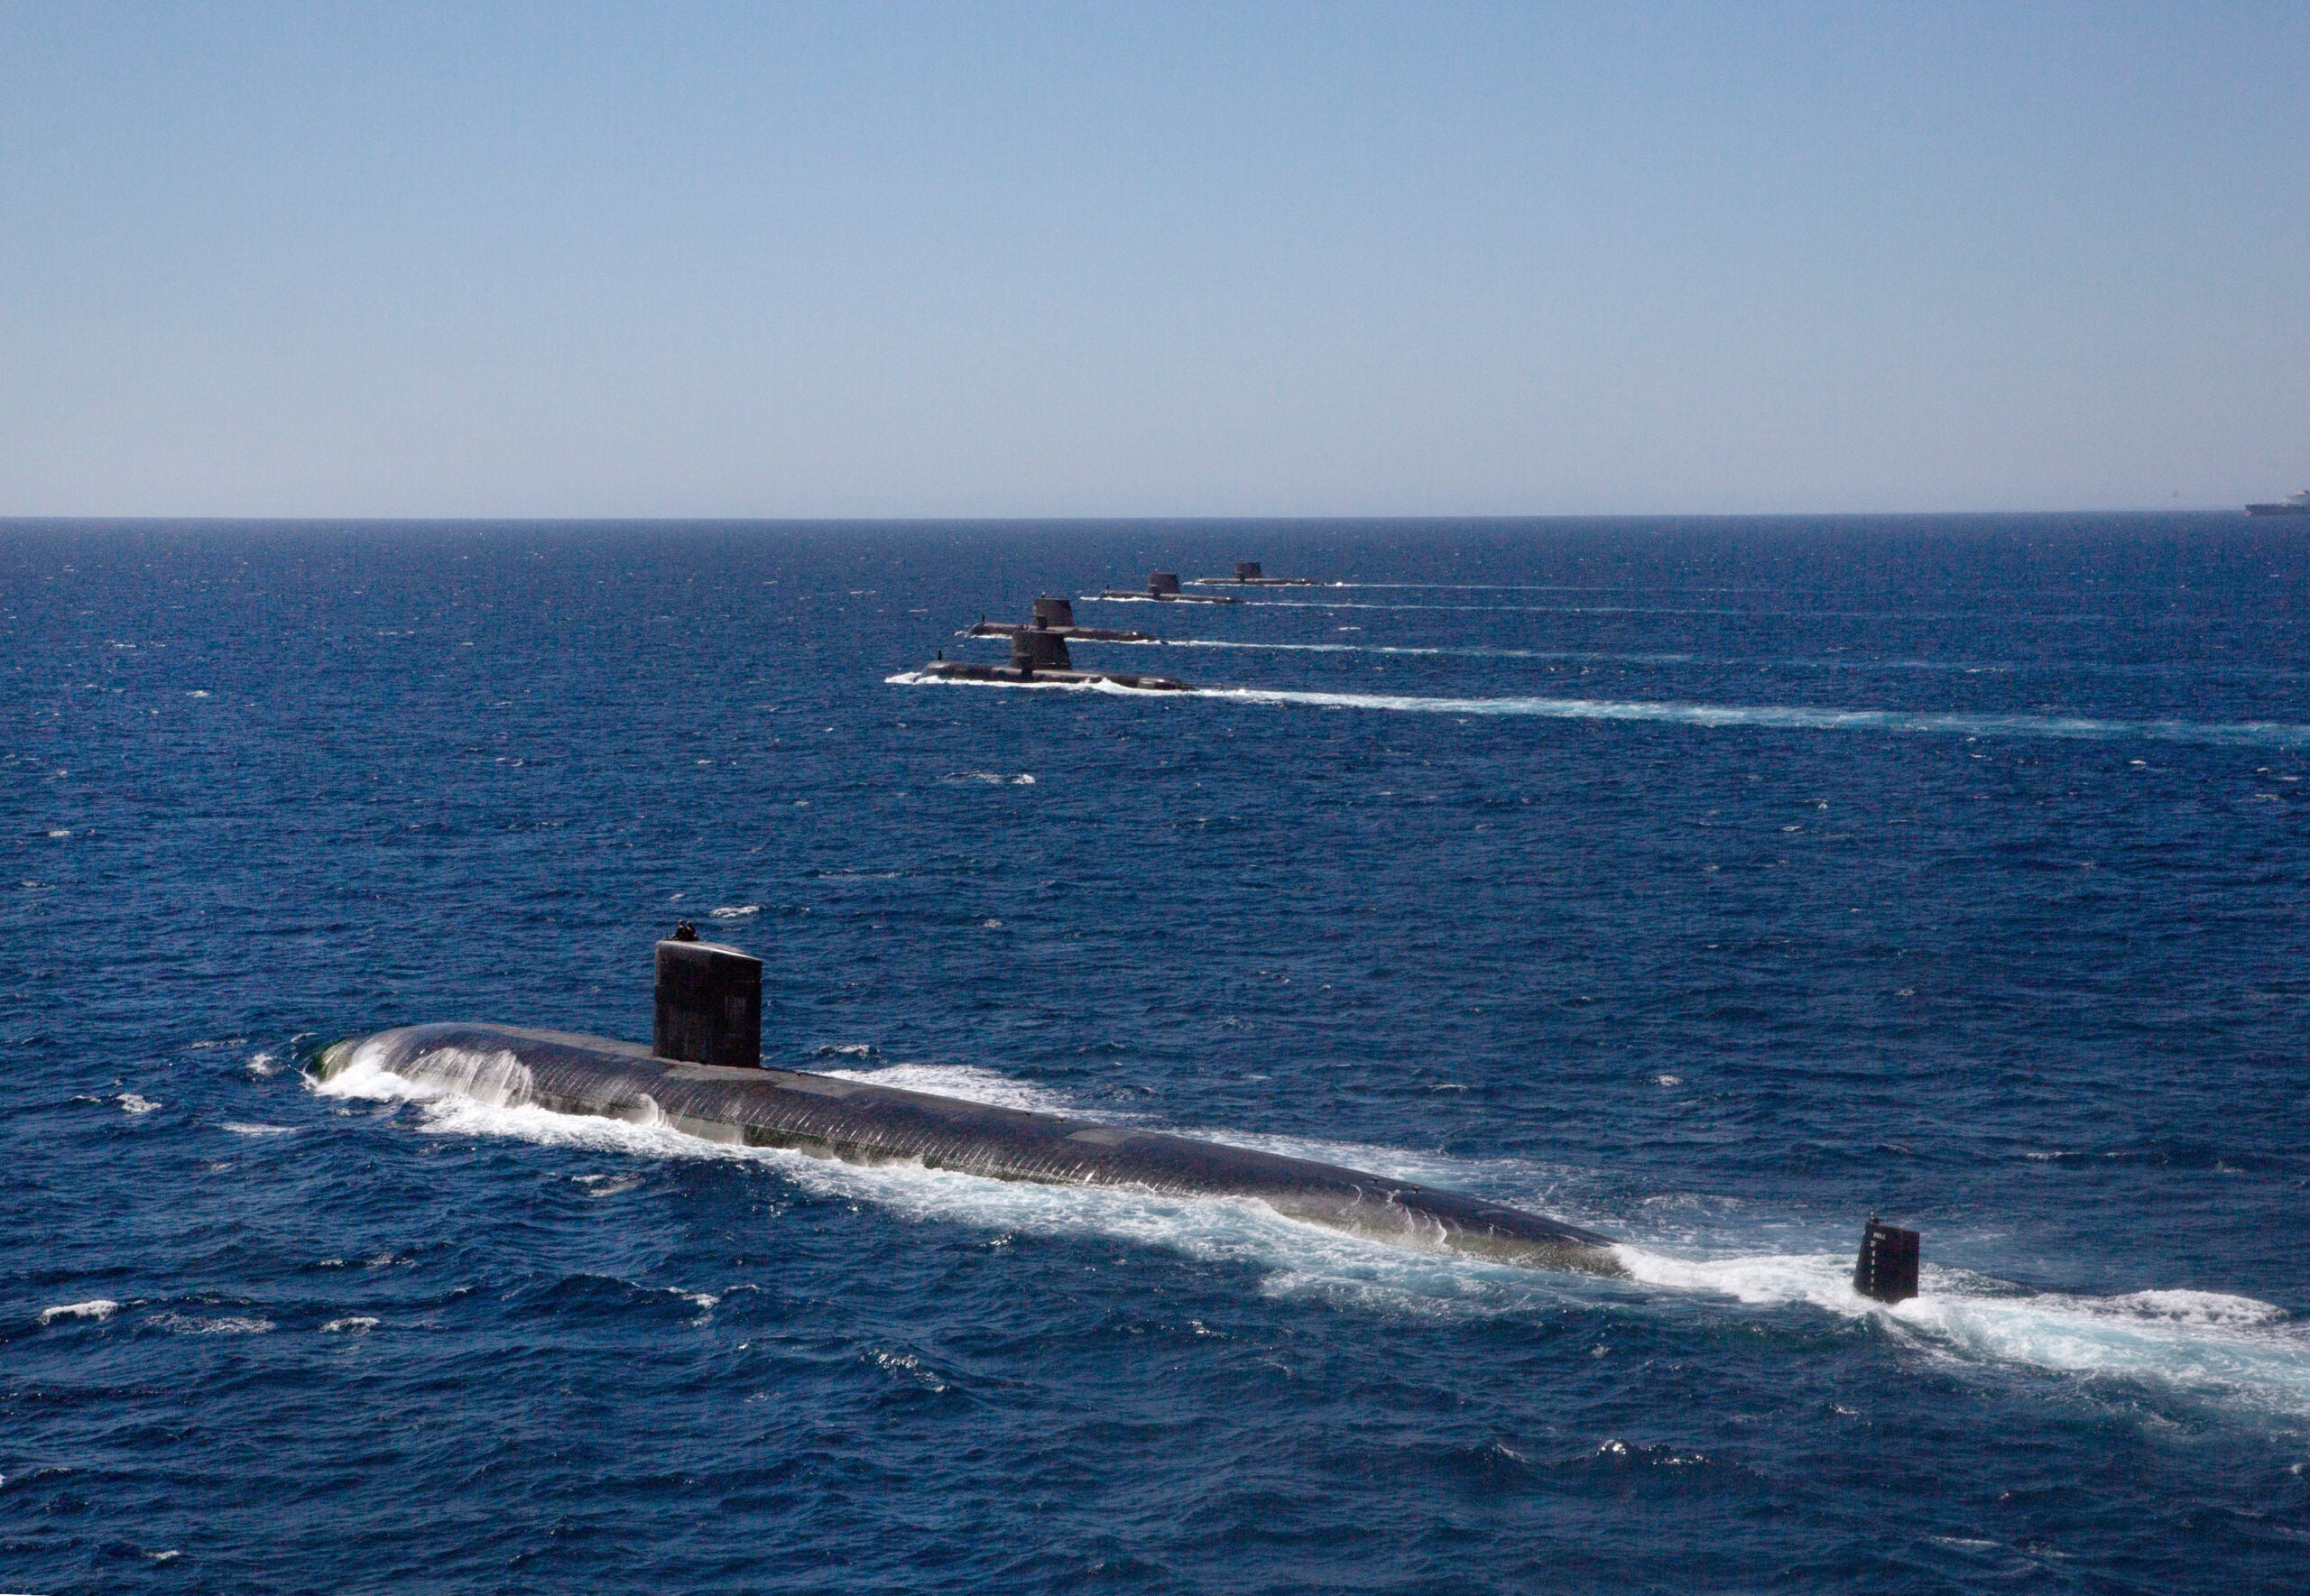 United States Navy Submarine USS Santa Fe transits in formation on the surface with Royal Australian Navy Collins Class Submarines HMAS Collins, HMAS Farncomb, HMAS Dechaineux and HMAS Sheean in the West Australian Exercise Area. *** Local Caption *** Royal Australian Navy Collins Class Submarines HMAS Collins, HMAS Farncomb, HMAS Dechaineux and HMAS Sheean were joined in formation by United States Navy Submarine USS Santa Fe in the West Australian Exercise Area for a photo opportunity in February 2019. The submarines were in the area to participate in several activities, including Exercise Lungfish 2019 and Exercise Ocean Explorer 2019.